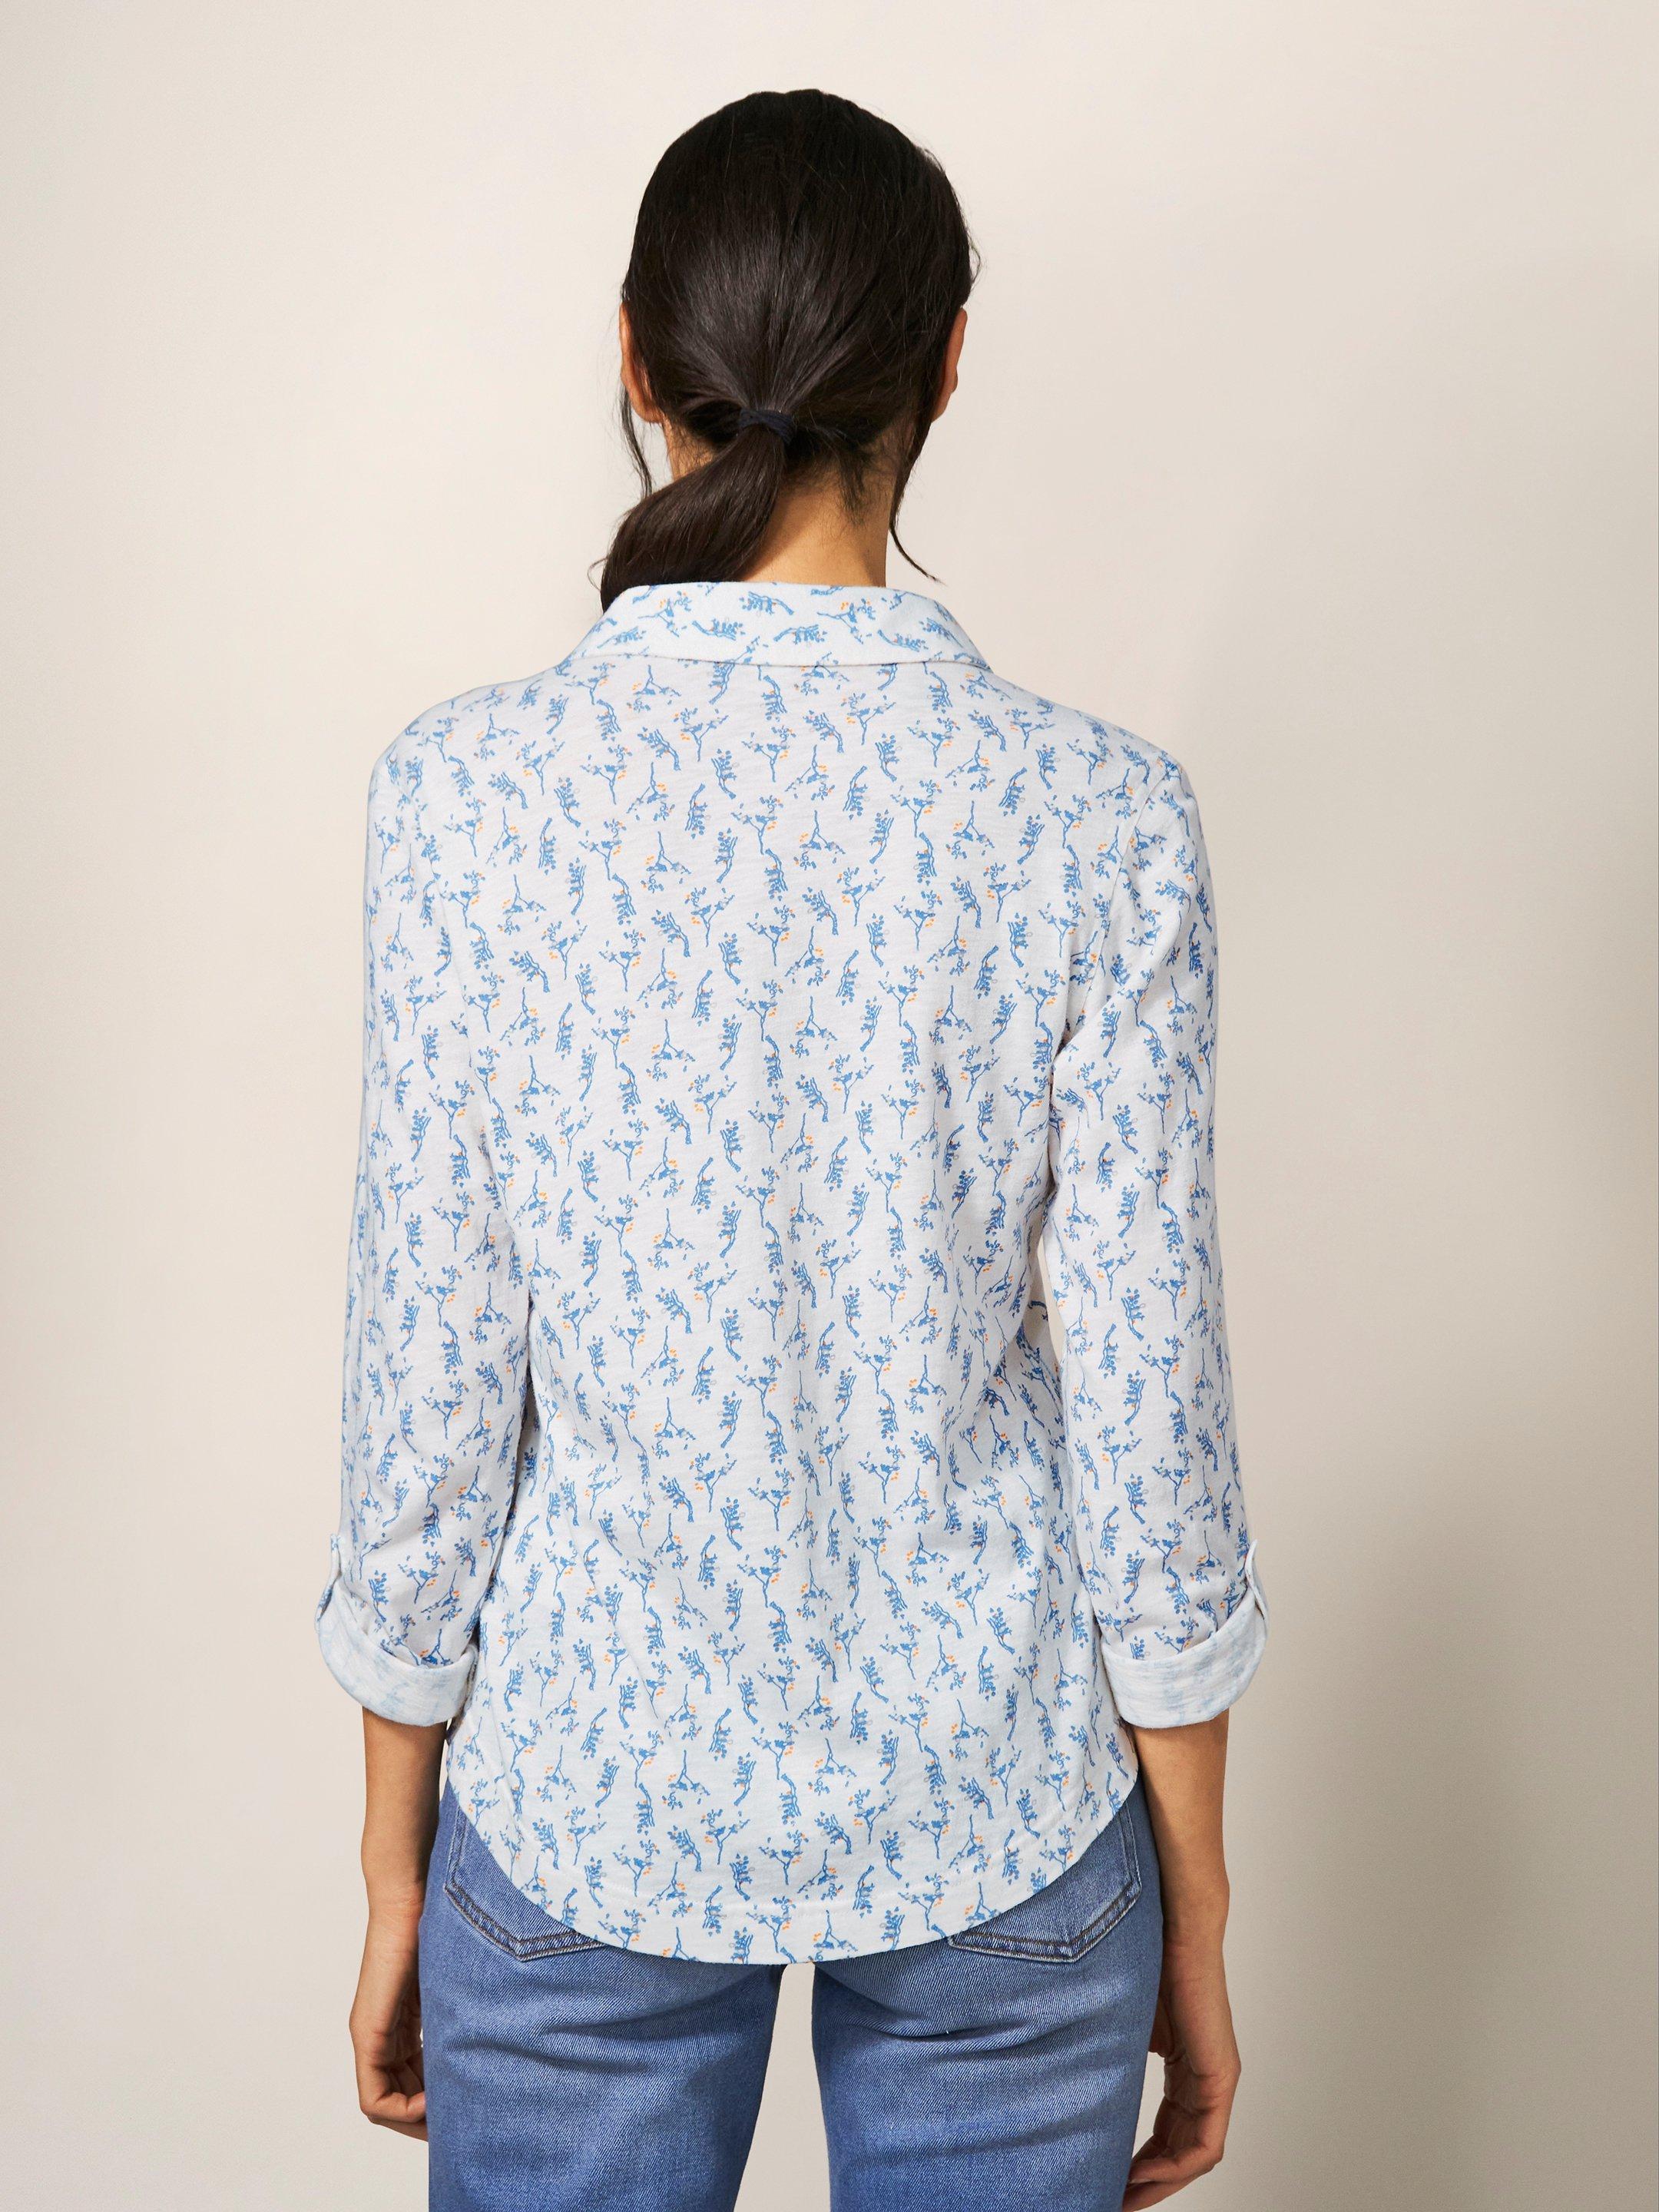 Annie Jersey Printed Shirt in WHITE MLT - MODEL BACK